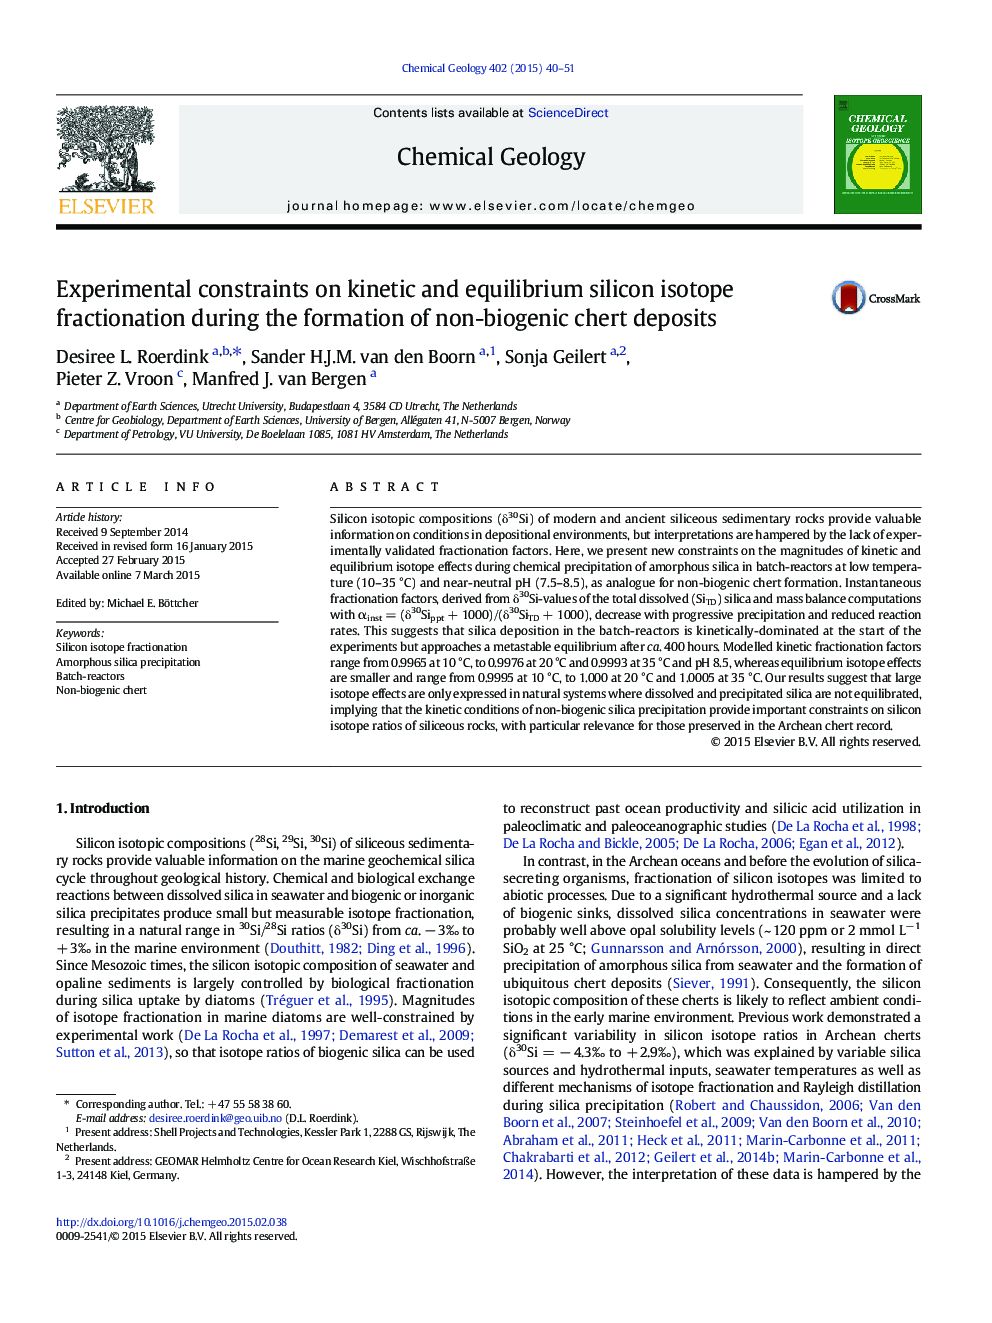 Experimental constraints on kinetic and equilibrium silicon isotope fractionation during the formation of non-biogenic chert deposits